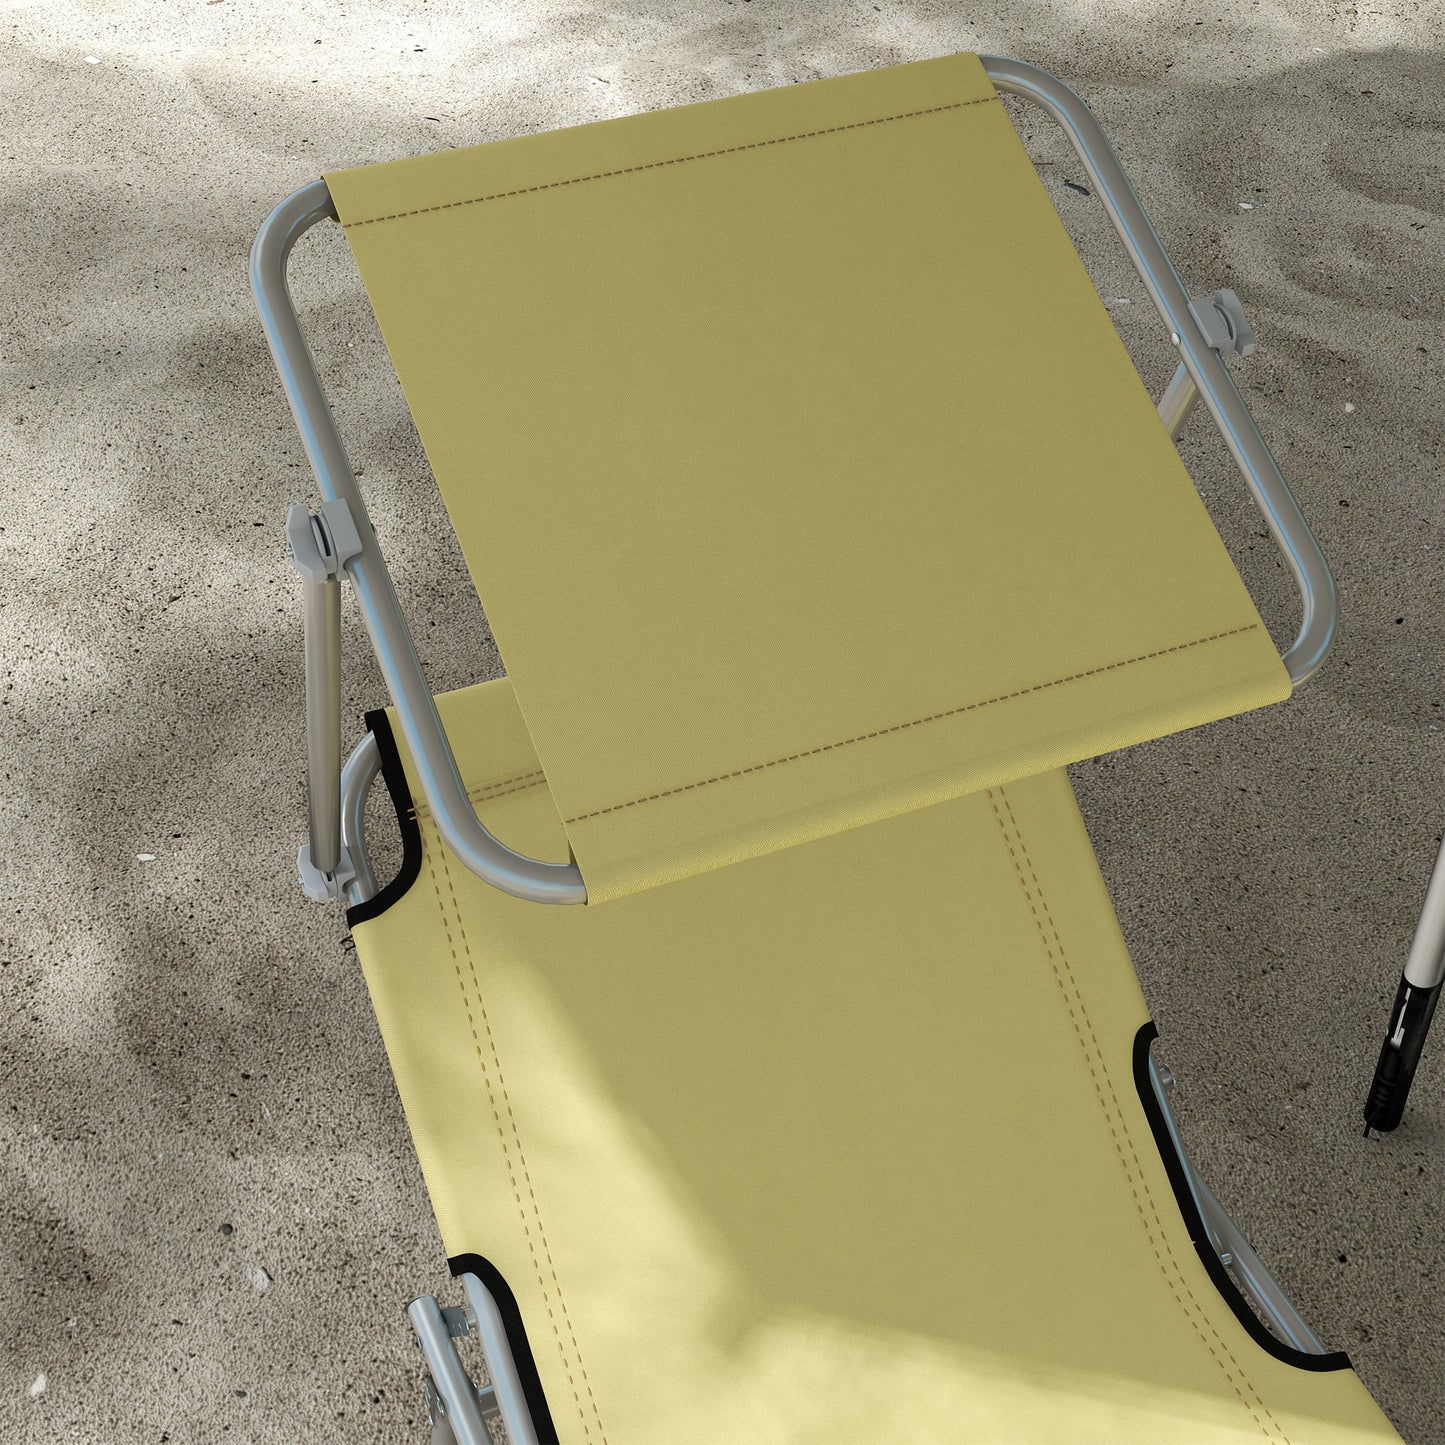 Outsunny 2-Piece Foldable Sun Lounger Set with Shade - Beige